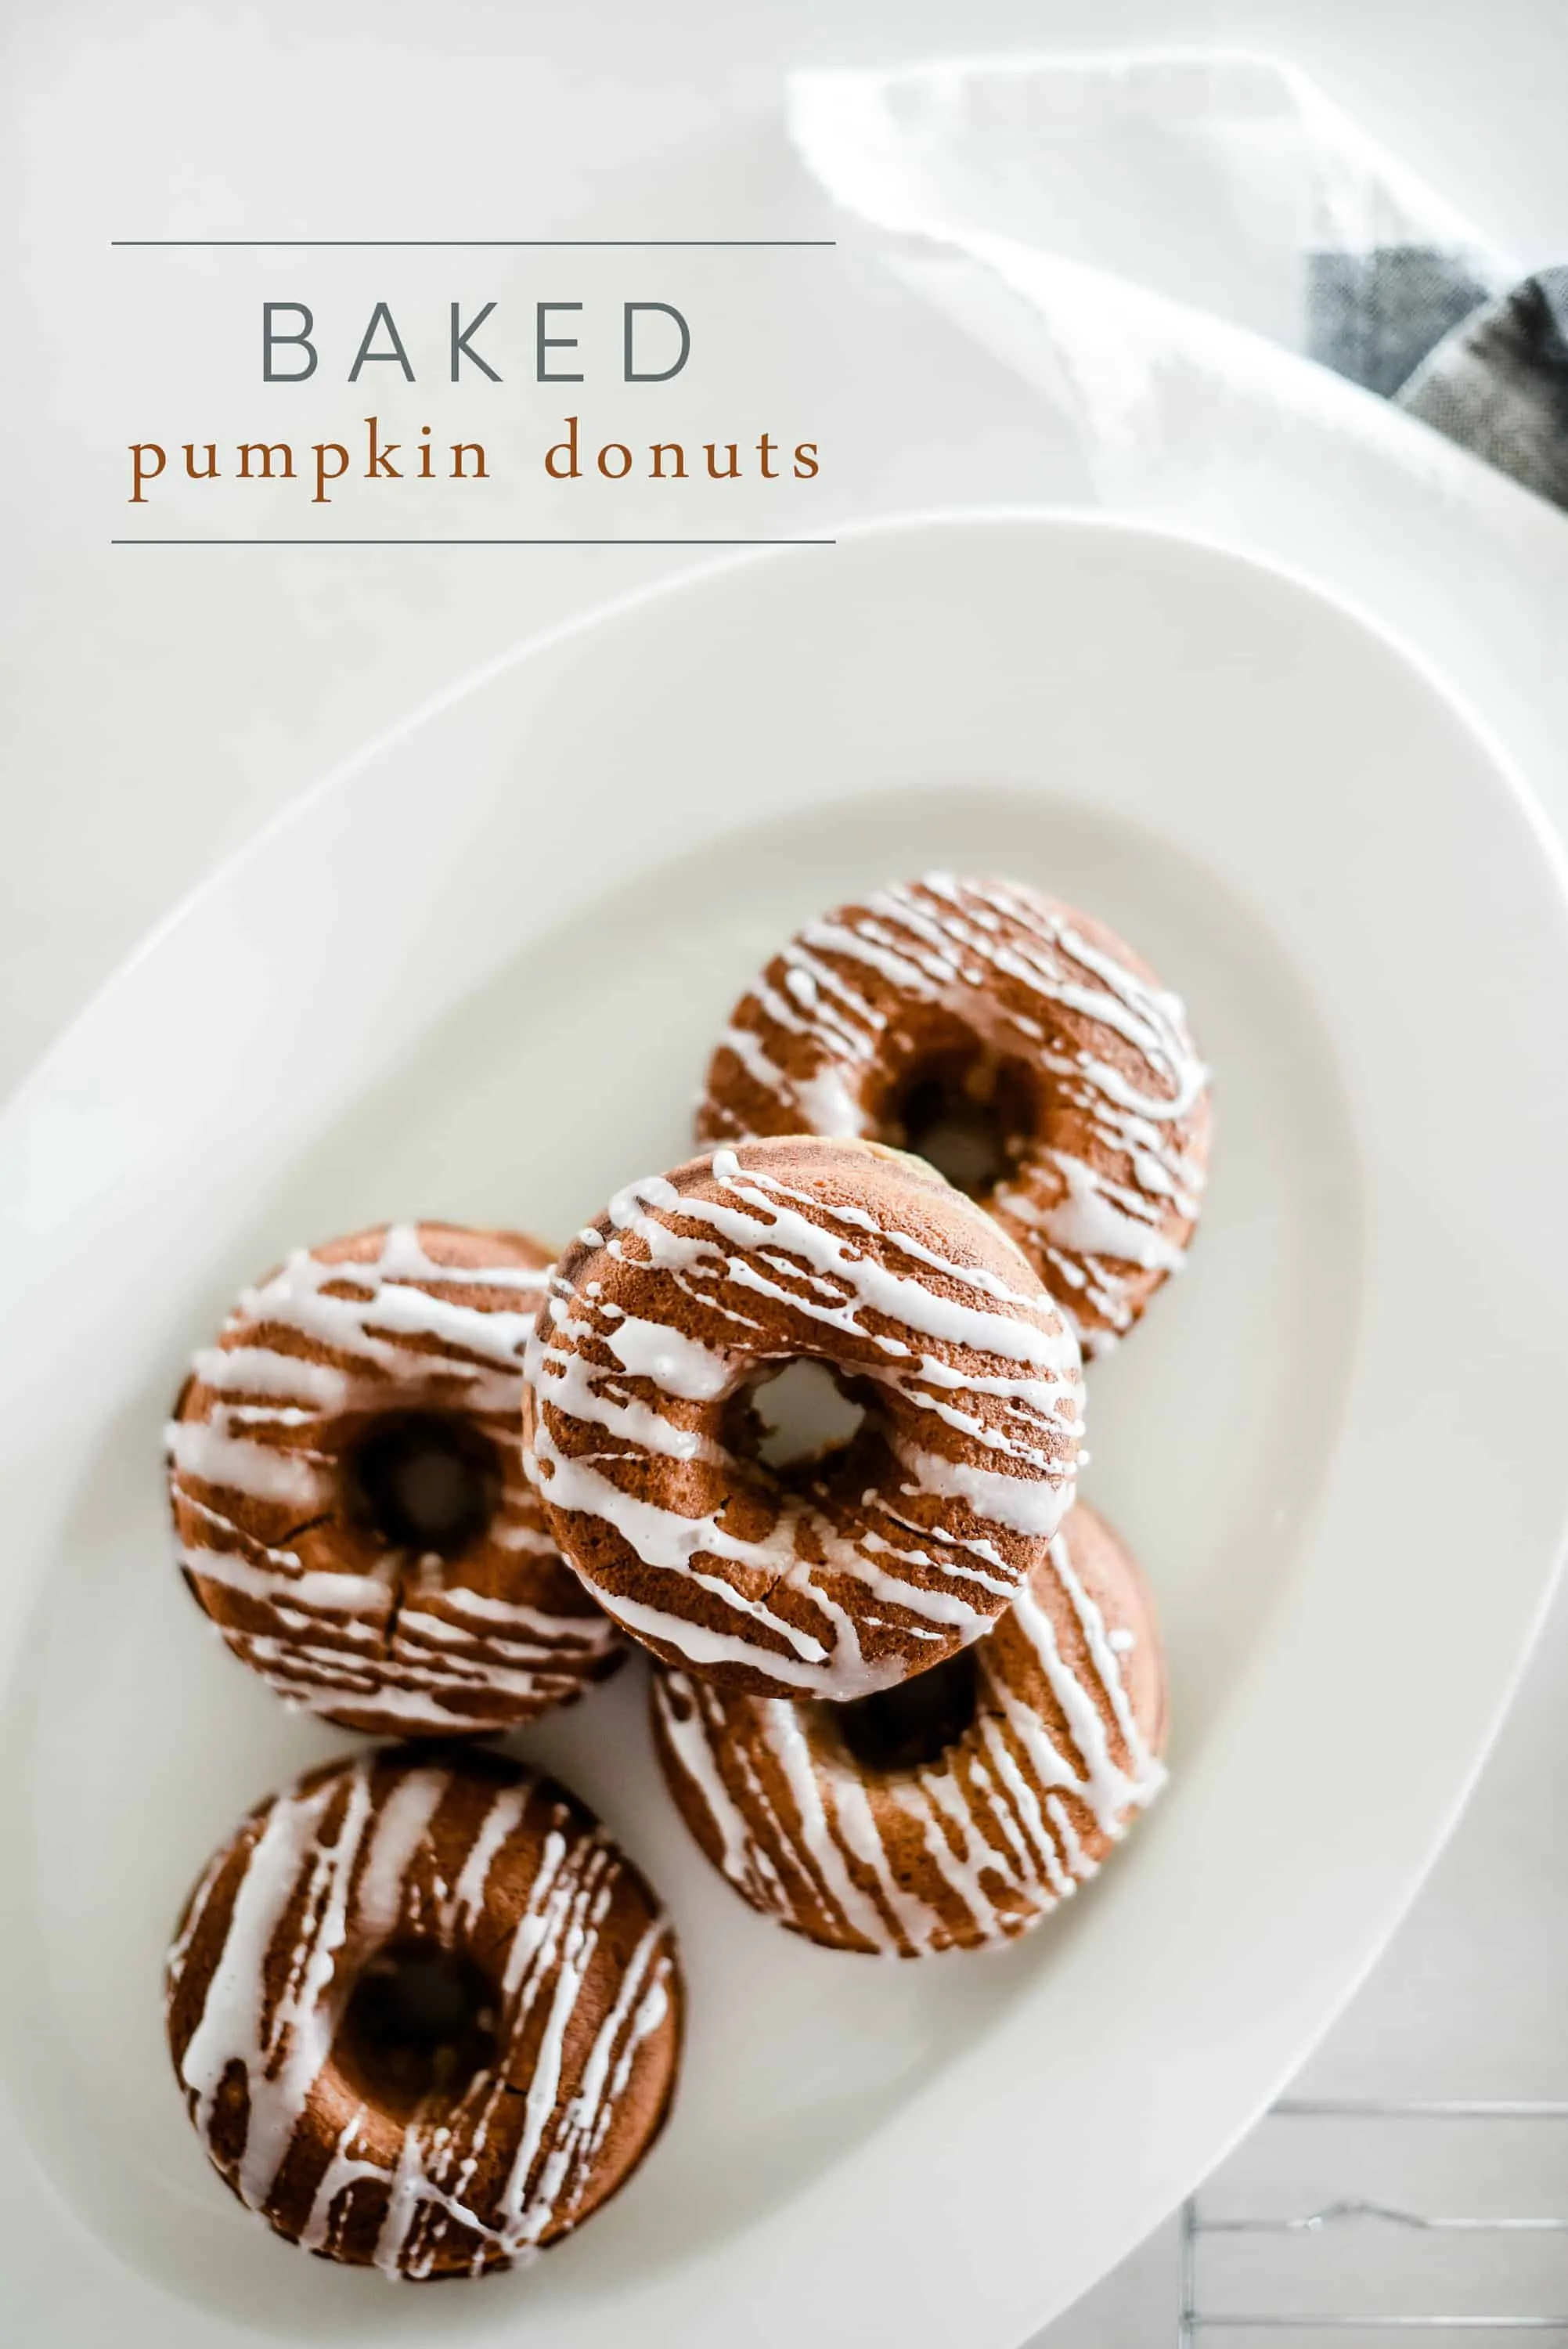 Fall is right around the corner, and that means it’s time to break out the pumpkin recipes! Here are 20 delicious recipes to give a whirl this season – like these baked pumpkin donuts! Will you find a new favorite? 